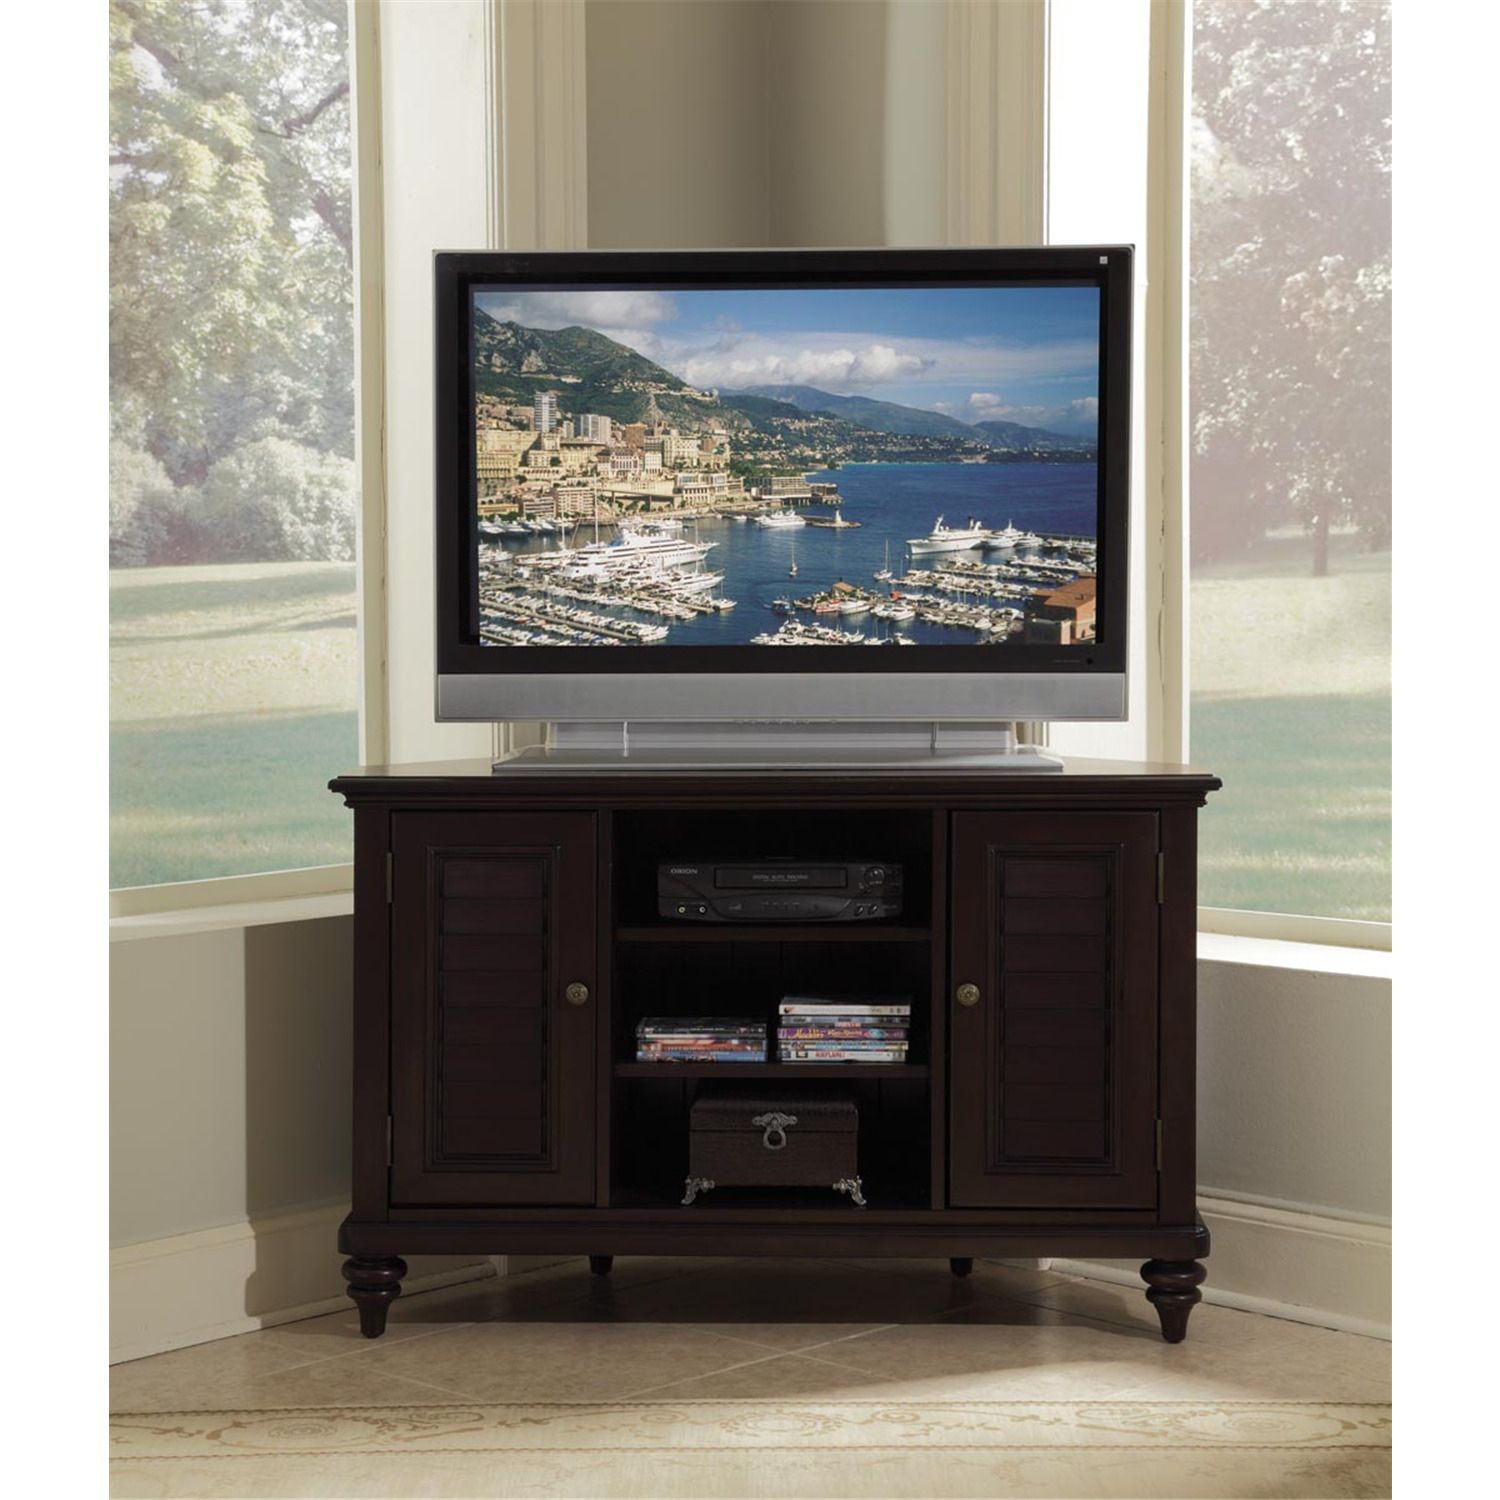 Furniture, Home Goods, Appliances, Athletic Gear, Fitness Throughout Cream Color Tv Stands (View 5 of 15)